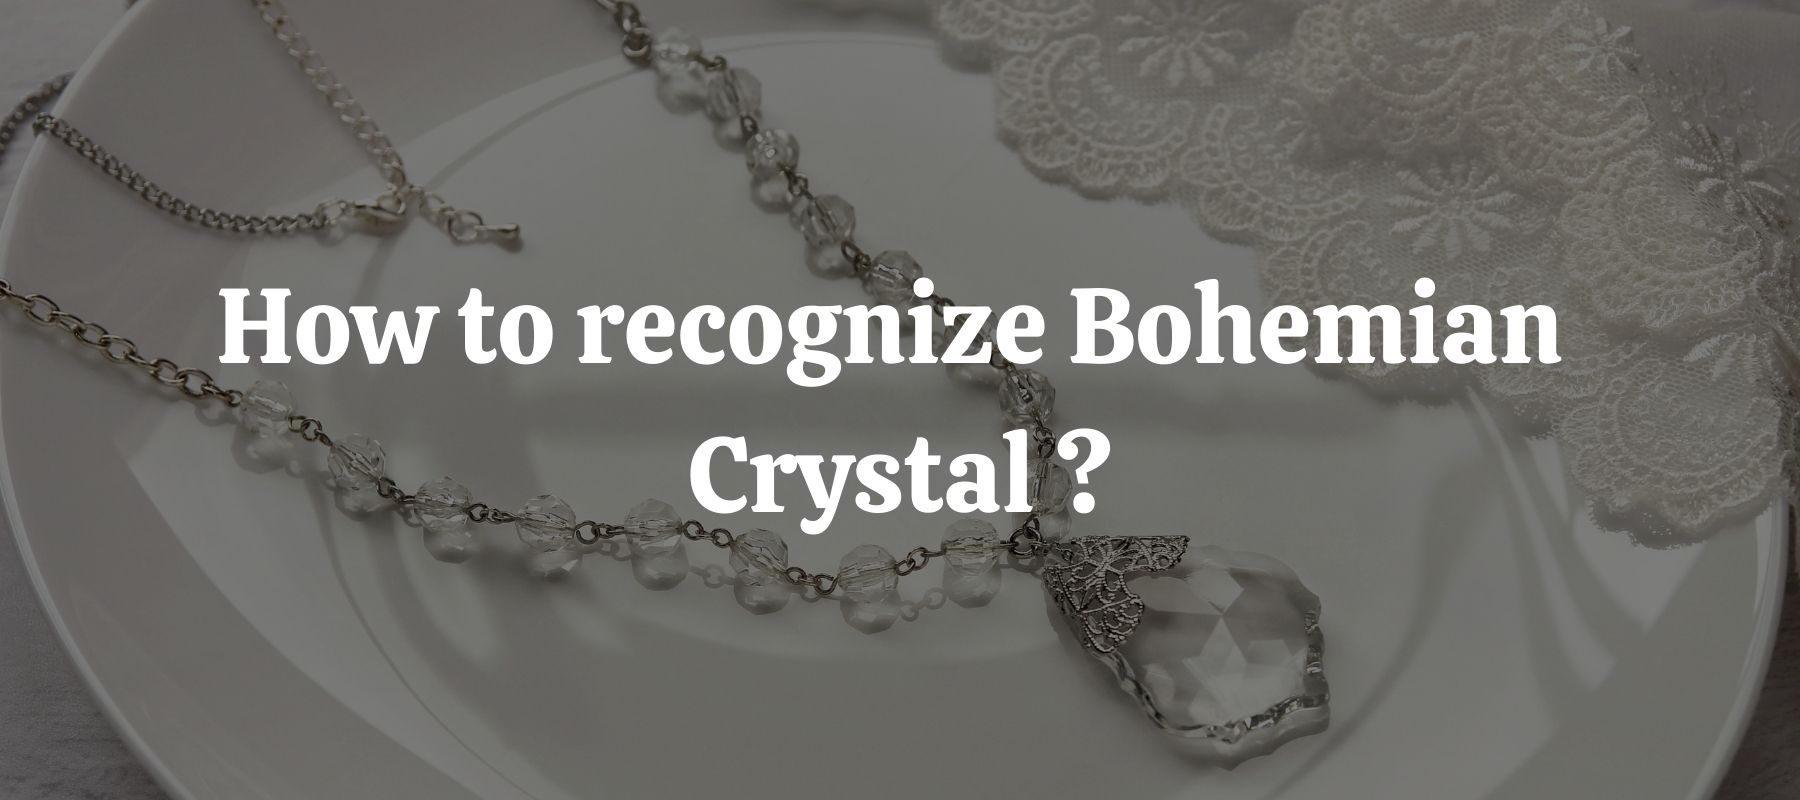 How to recognize Bohemian Crystal 